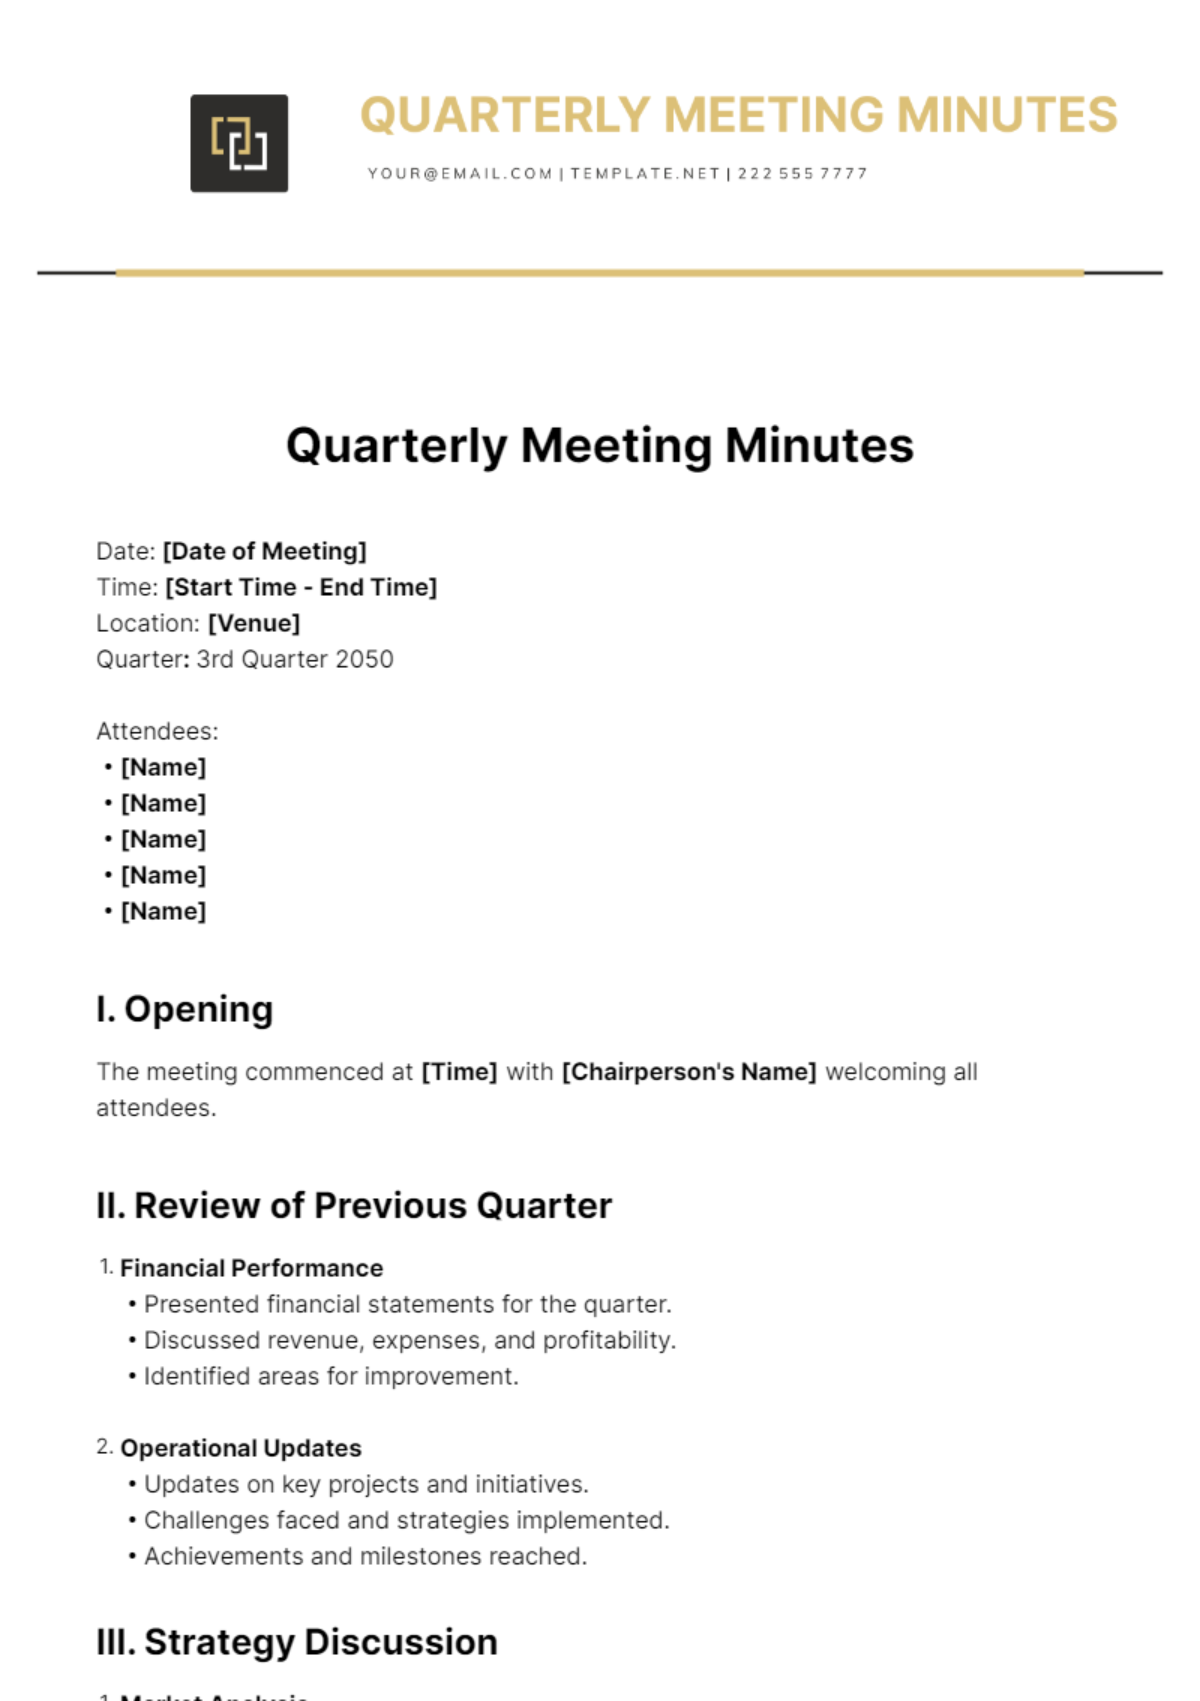 Quarterly Meeting Minutes Template